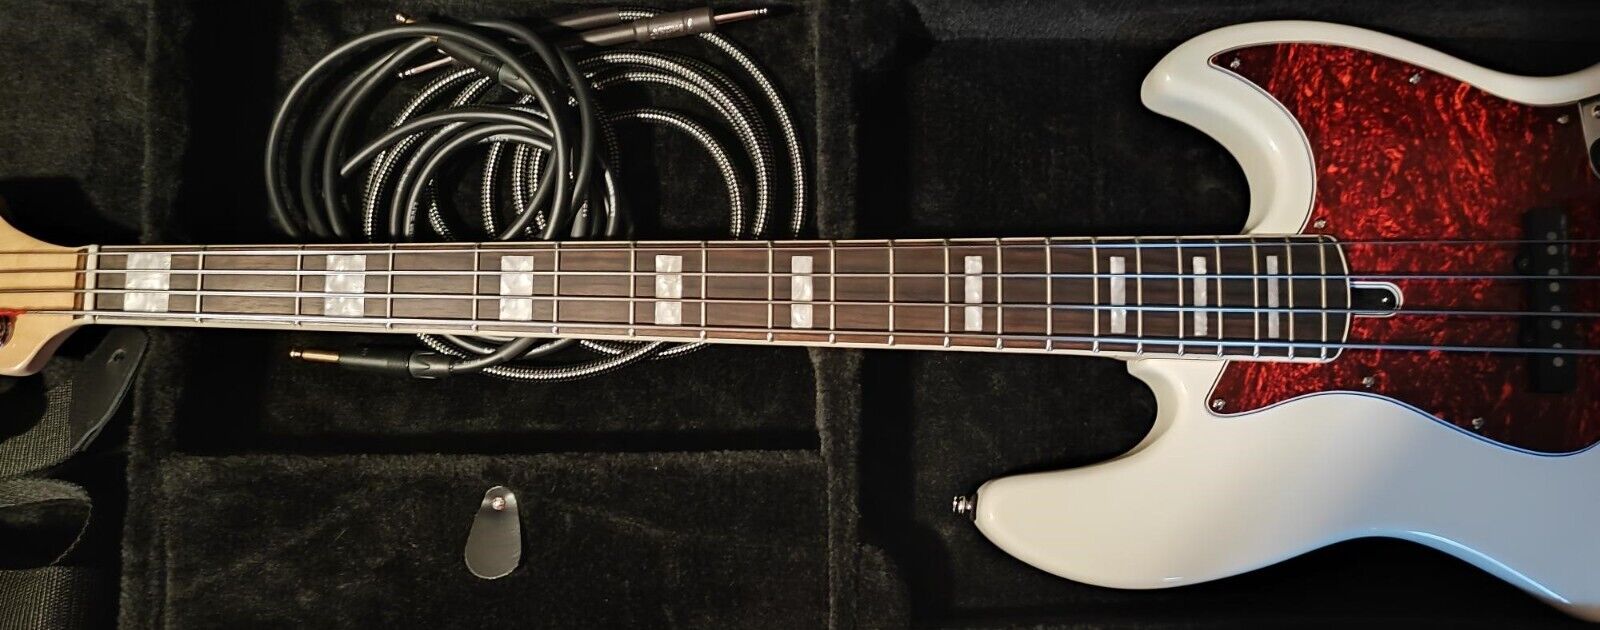 New 2023 Antique White "SIRE MARCUS MILLER V7 ACTIVE" Jazz Bass w/Hardshell Case "SIRE MARCUS MILLER" "SIRE MARCUS MILLER JAZZ BASS - фотография #20